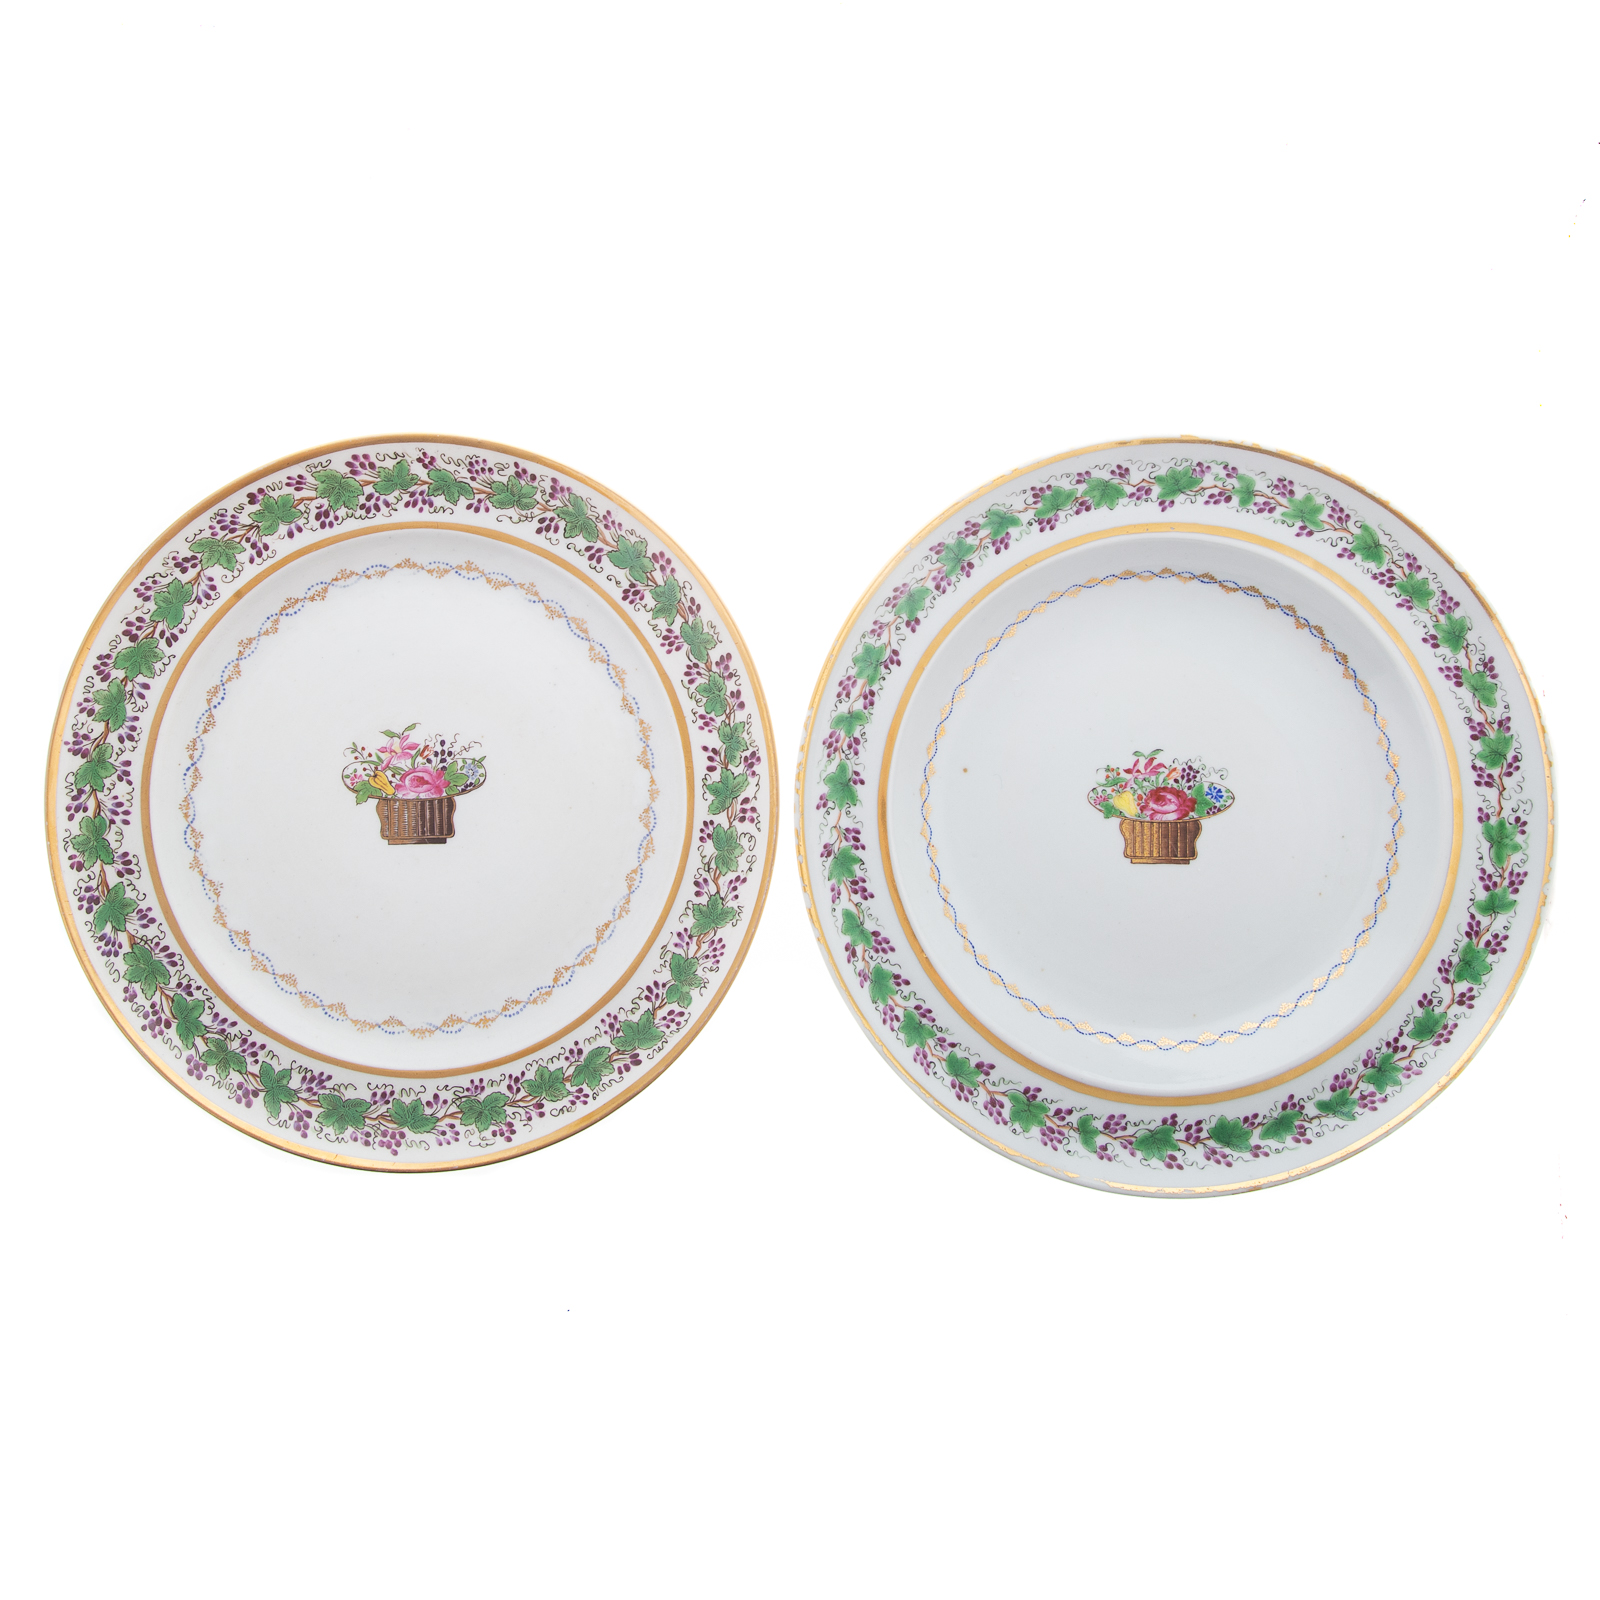 TWO CHINESE EXPORT PORCELAIN PLATES